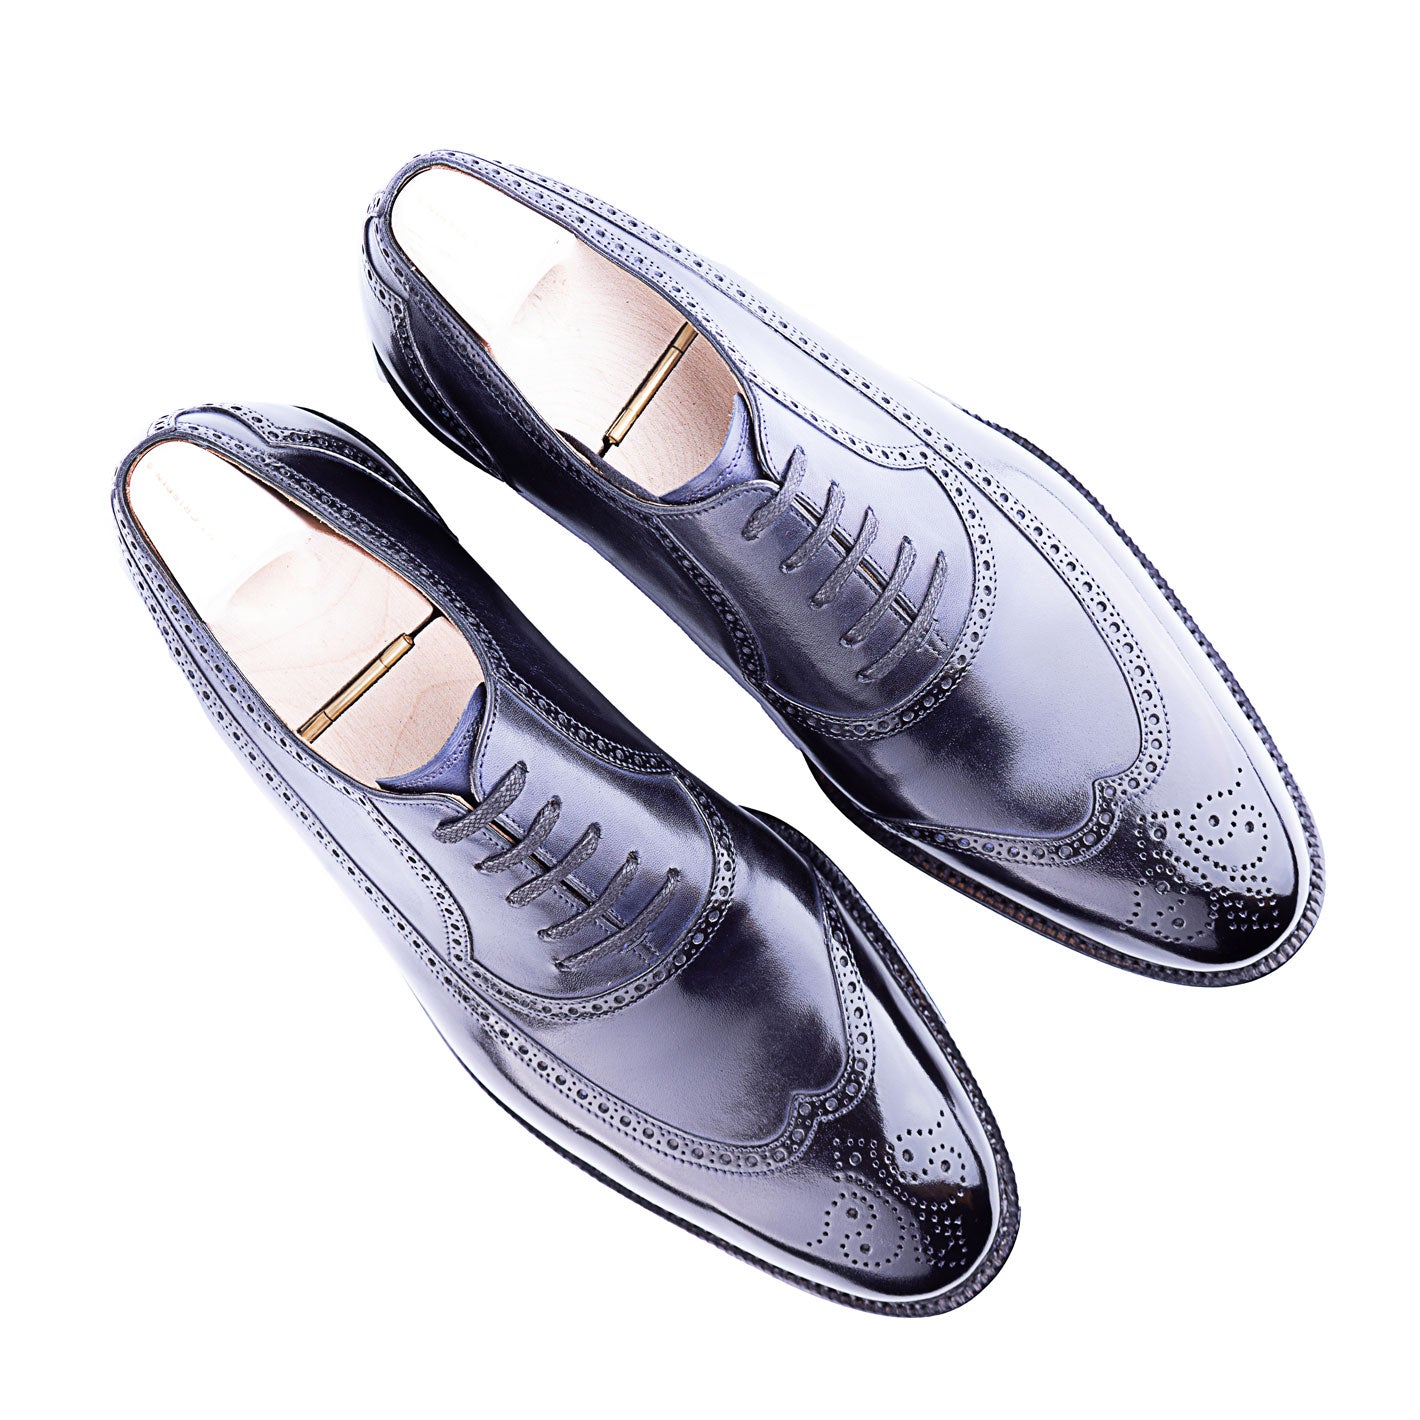 Brogued Oxford with medallion